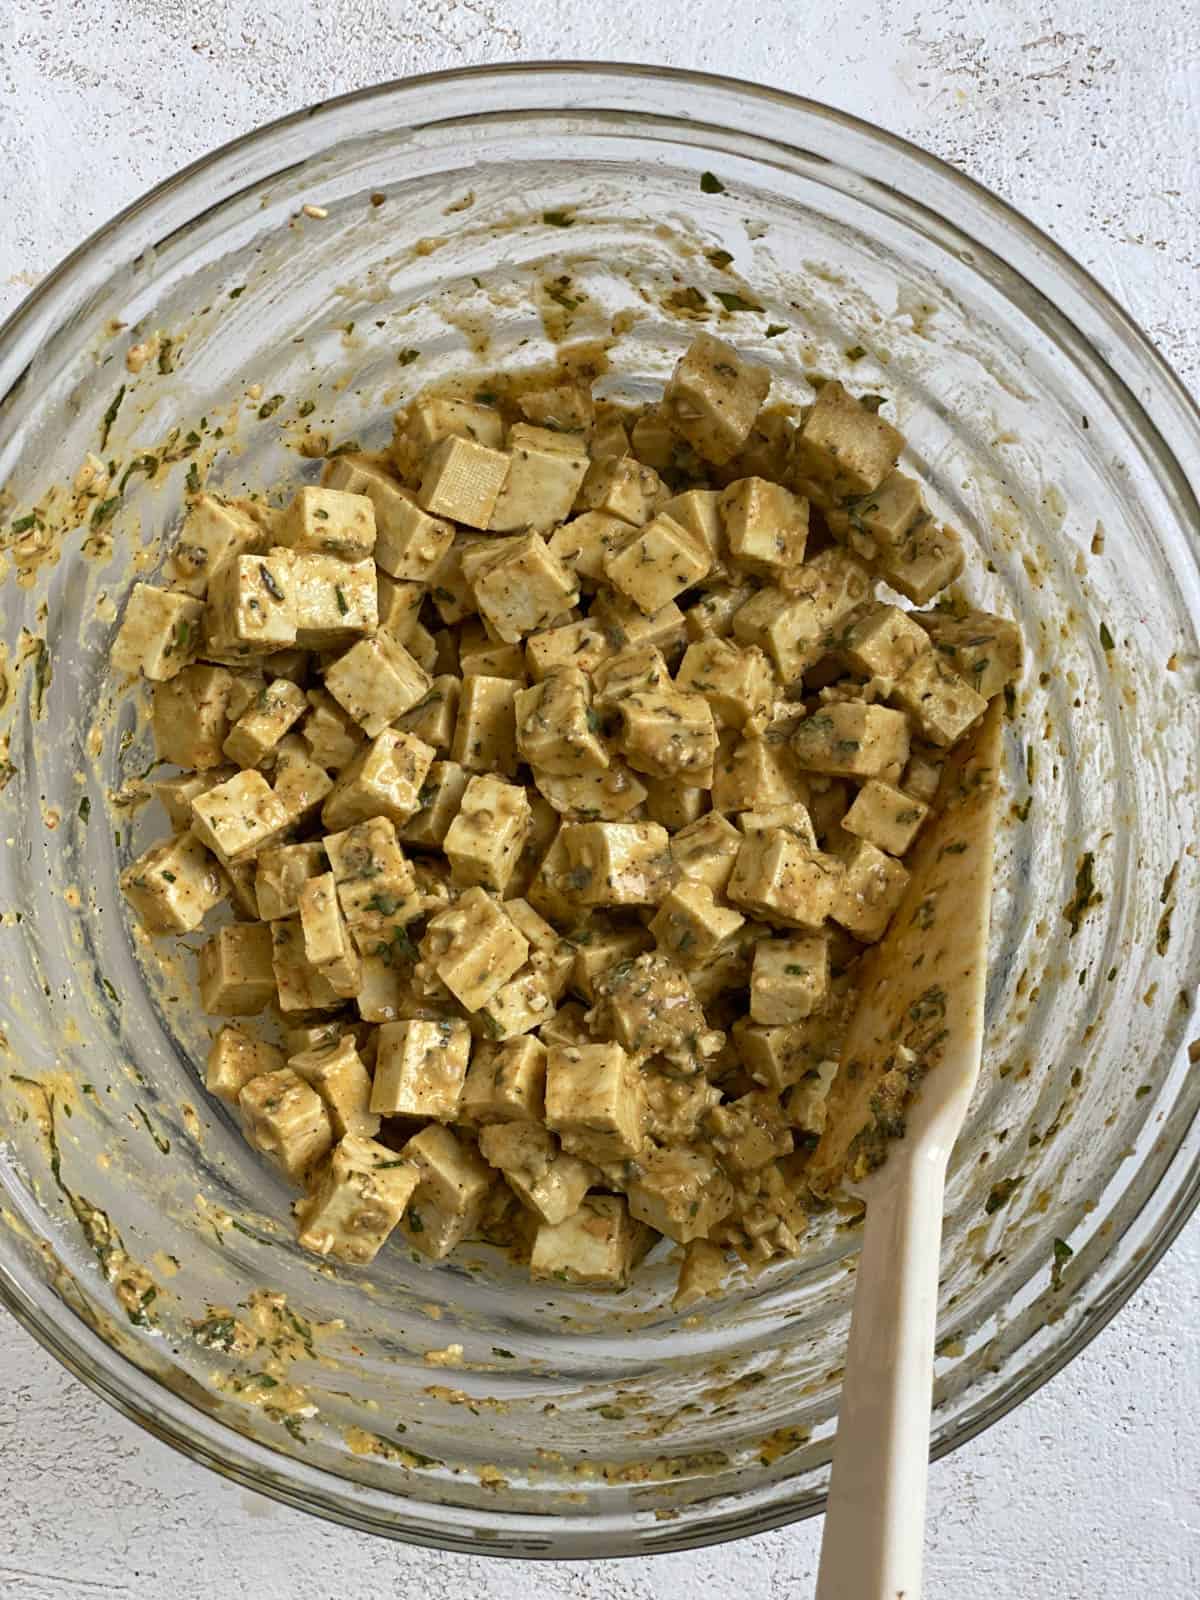 process s،t of mixing tofu mixture in a bowl